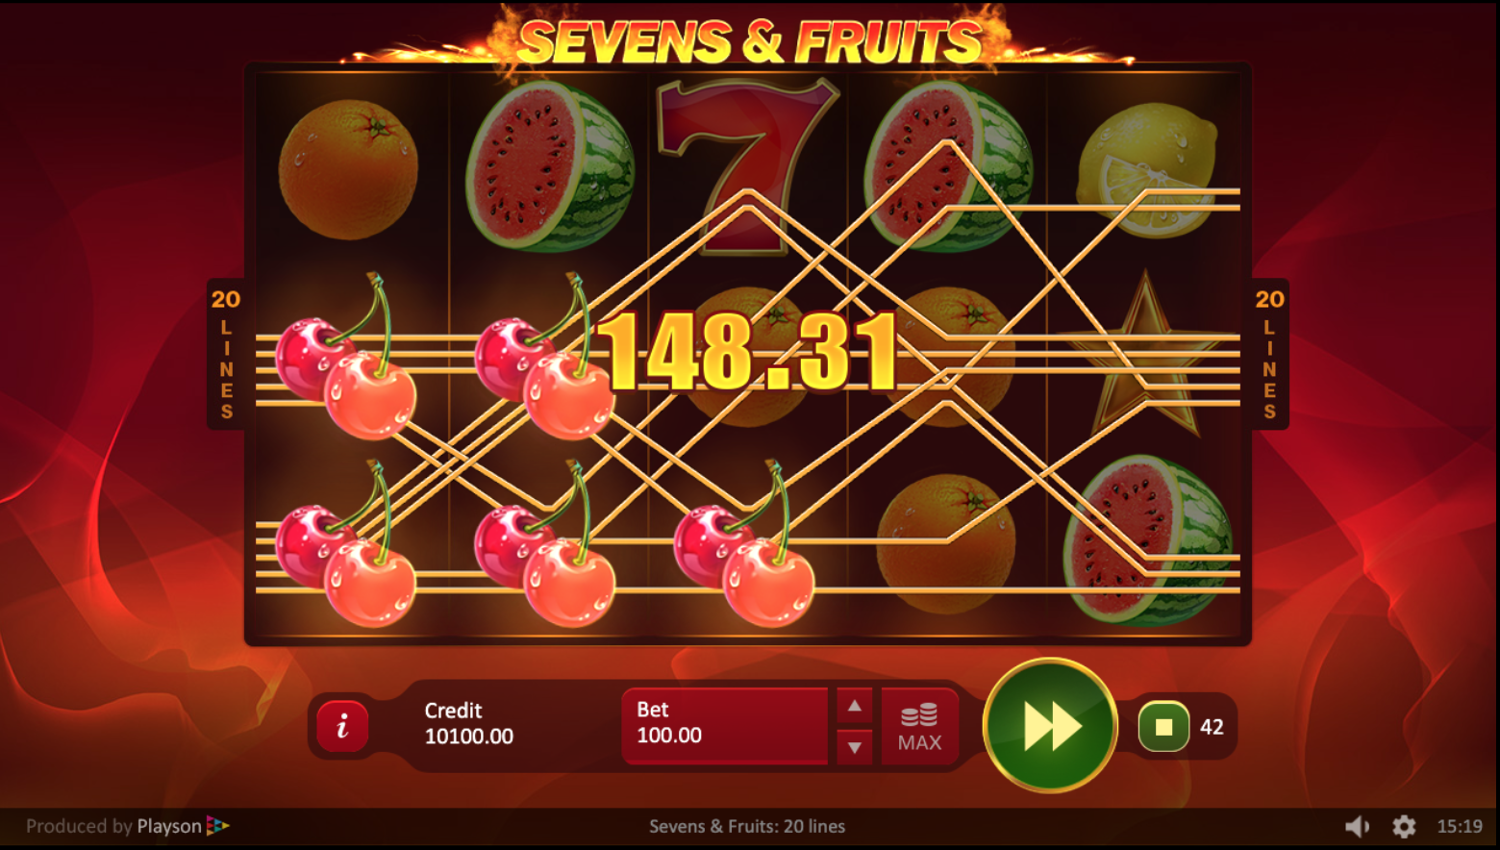 Playson - Sevens and Fruits: 20 Lines - Gameplay Demo